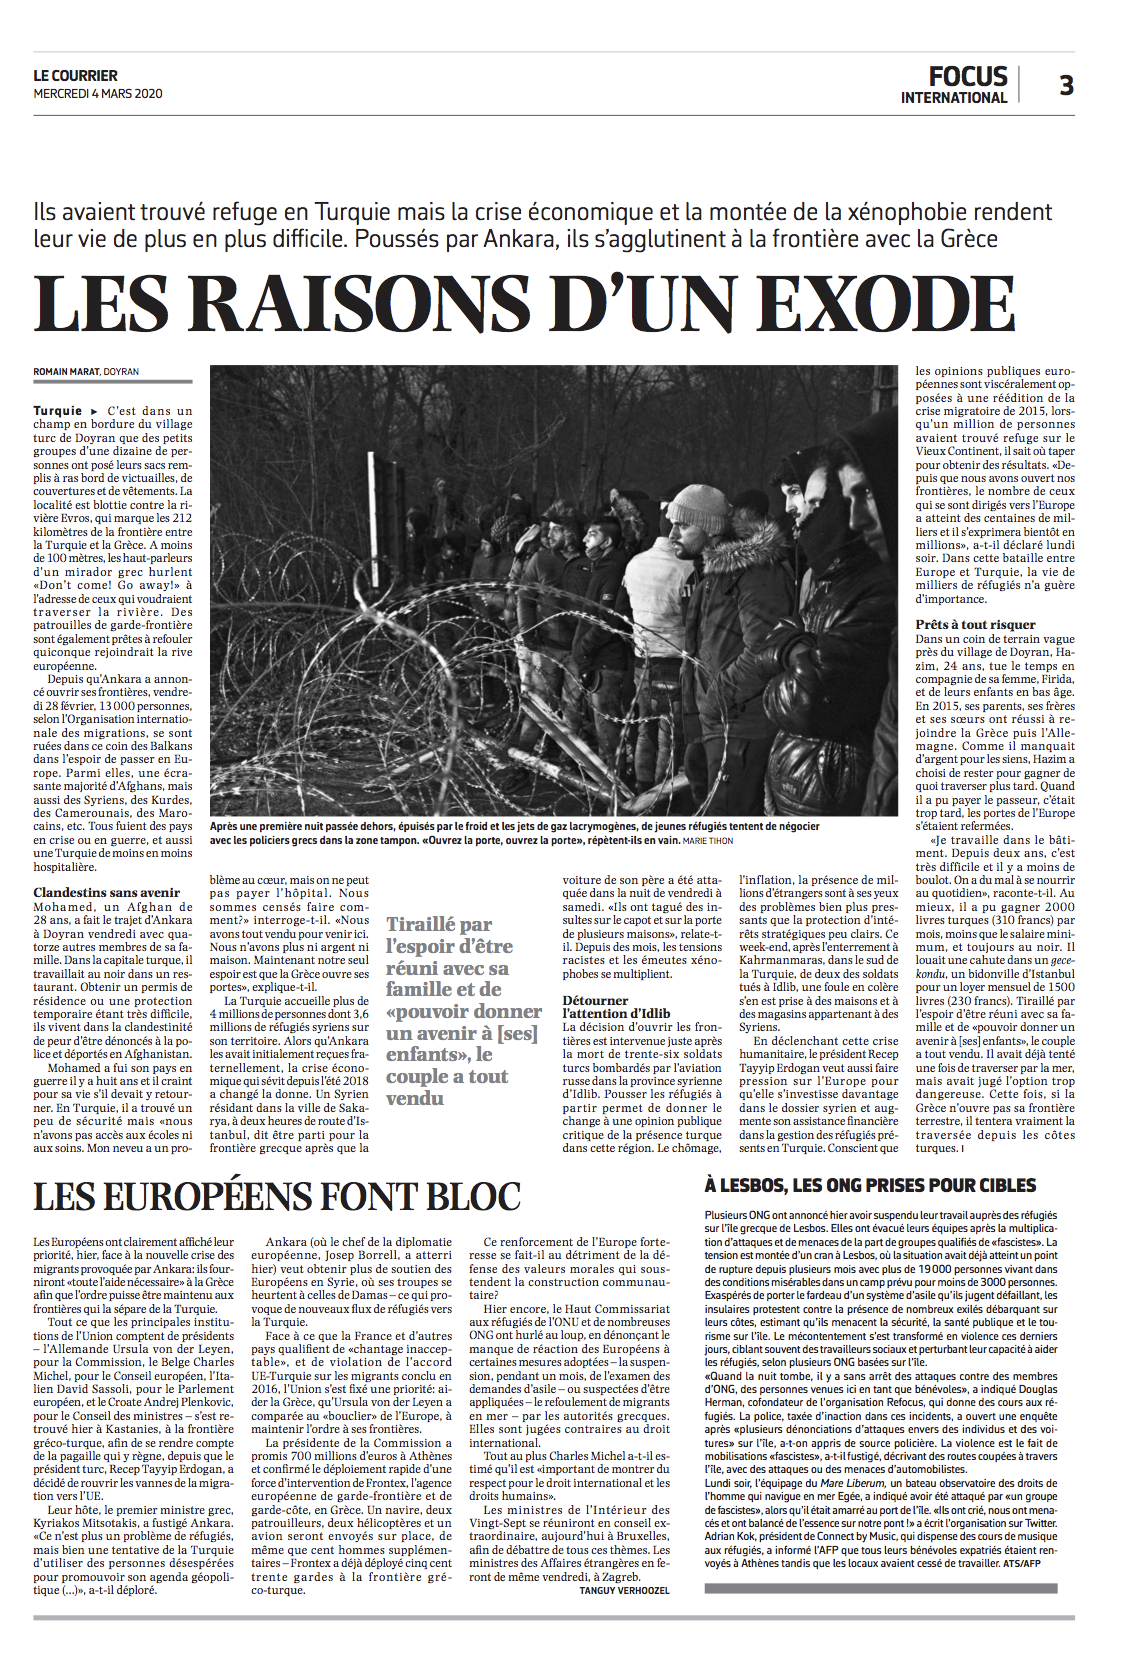 Image from Publications - Le Courrier